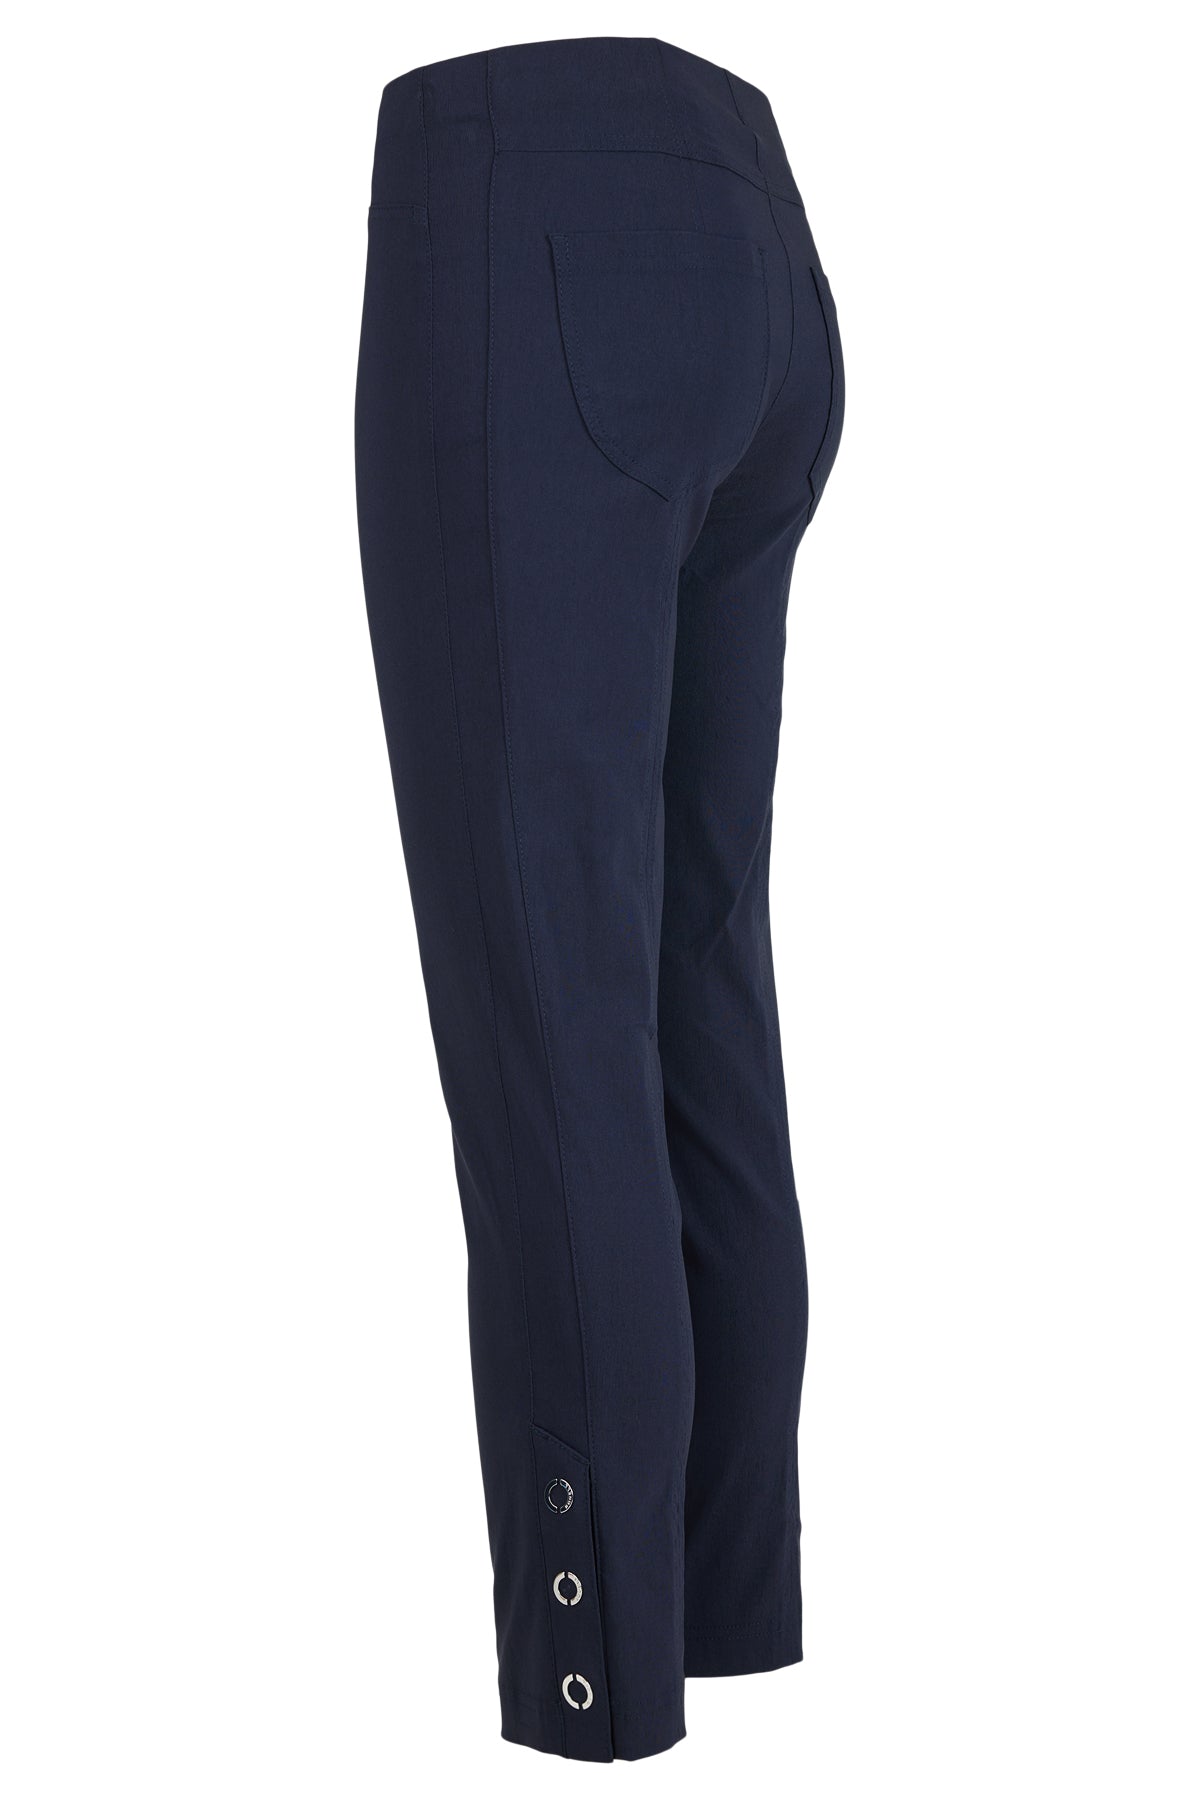 Robell Rose Slim Fit 09 With Silver Circle Embelishment (Navy 69)